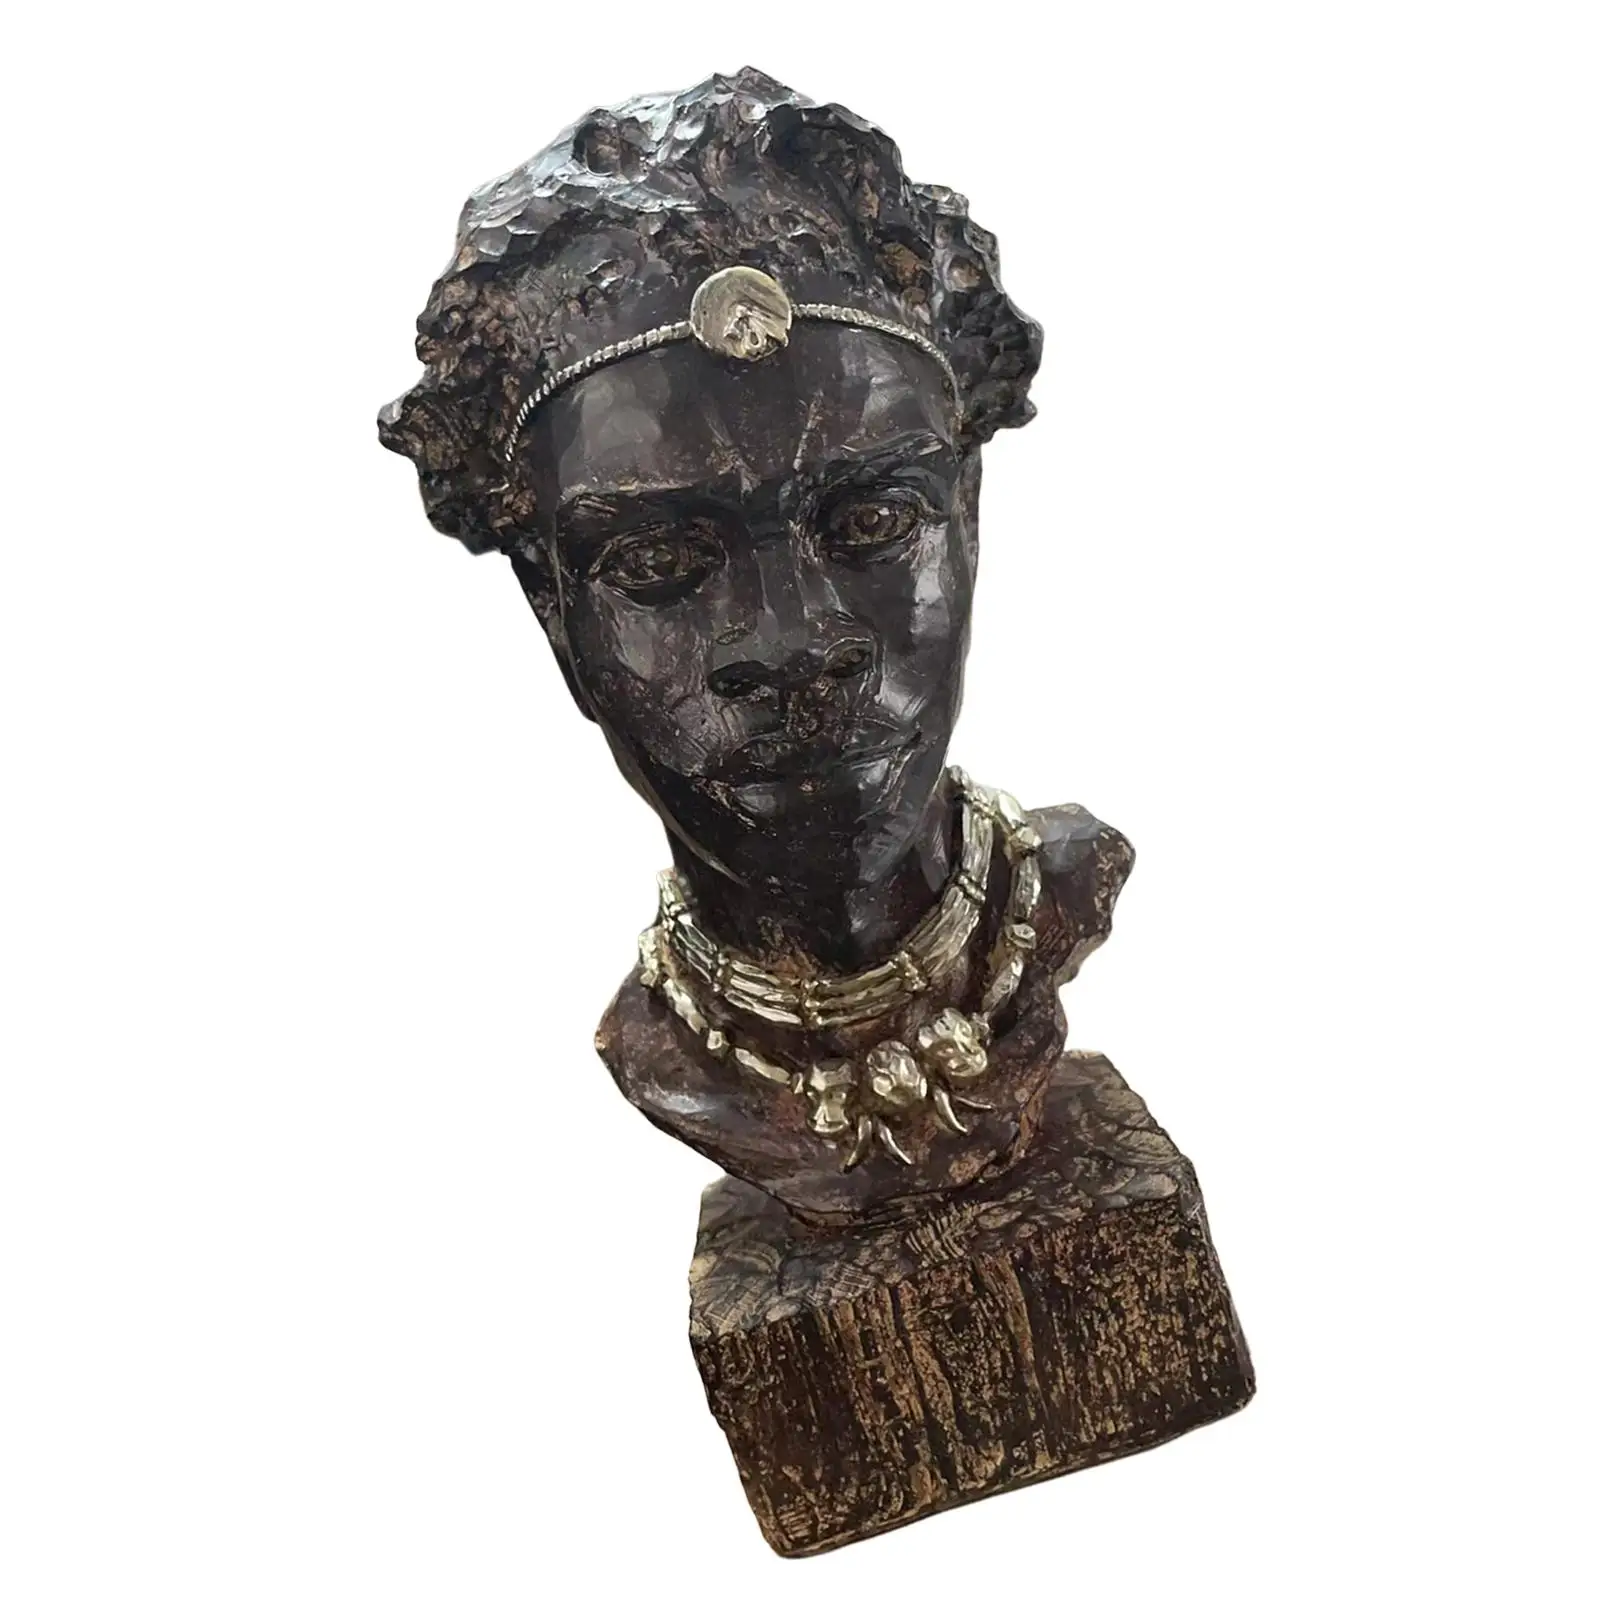 Men Resin Figurines Ornament Retro Style Home Decor African Statue Sculpture for Office Centerpieces Tabletop Bedroom Bathroom